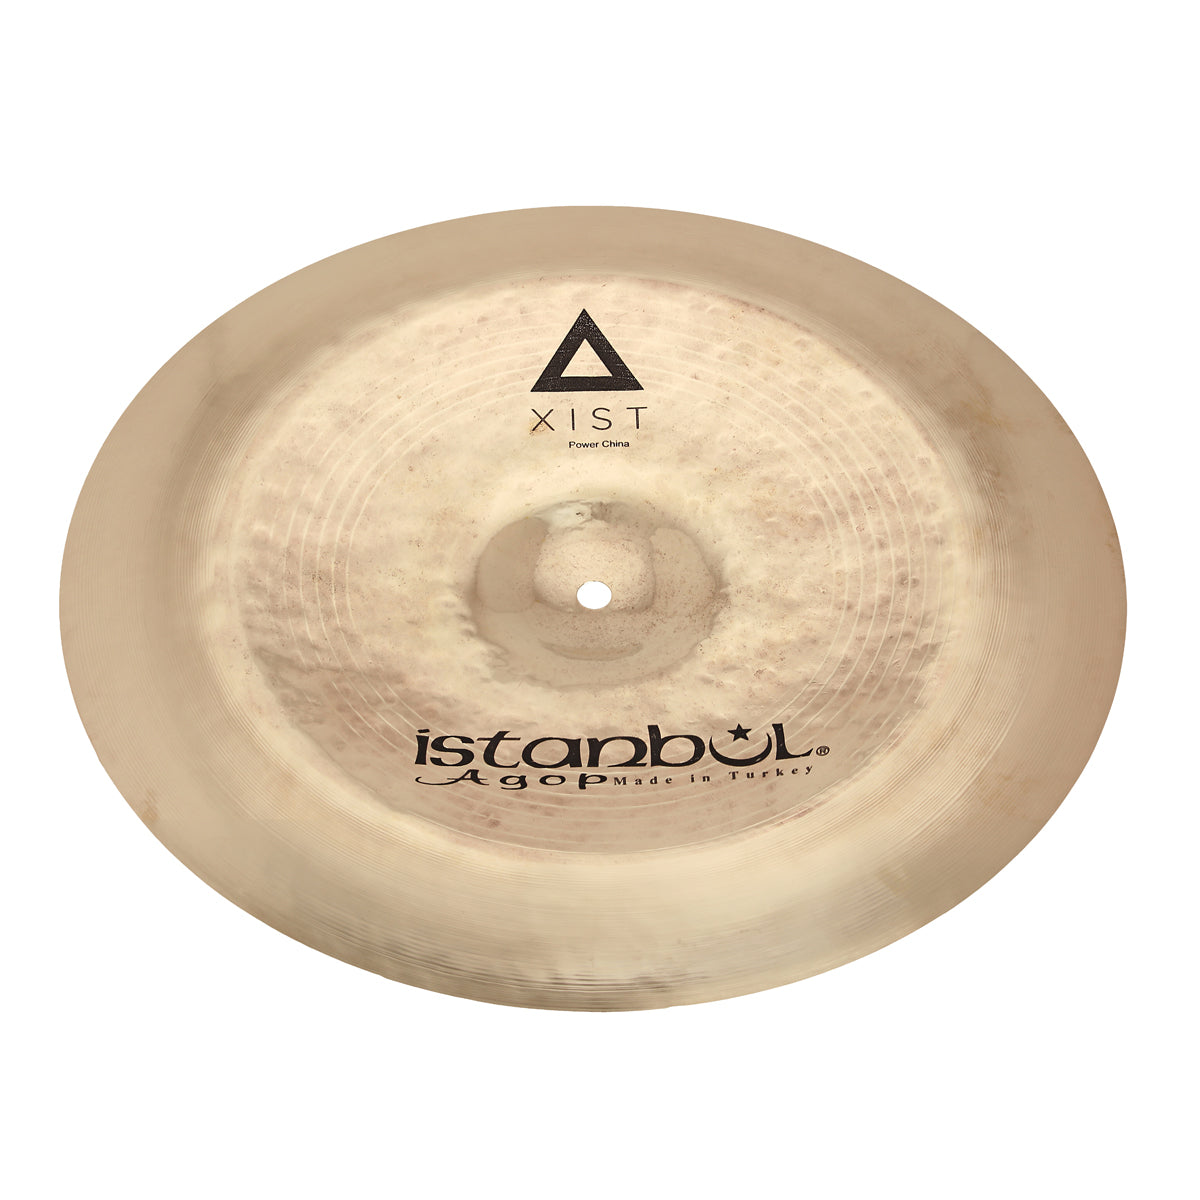 Istanbul Agop Xist 16" Power China